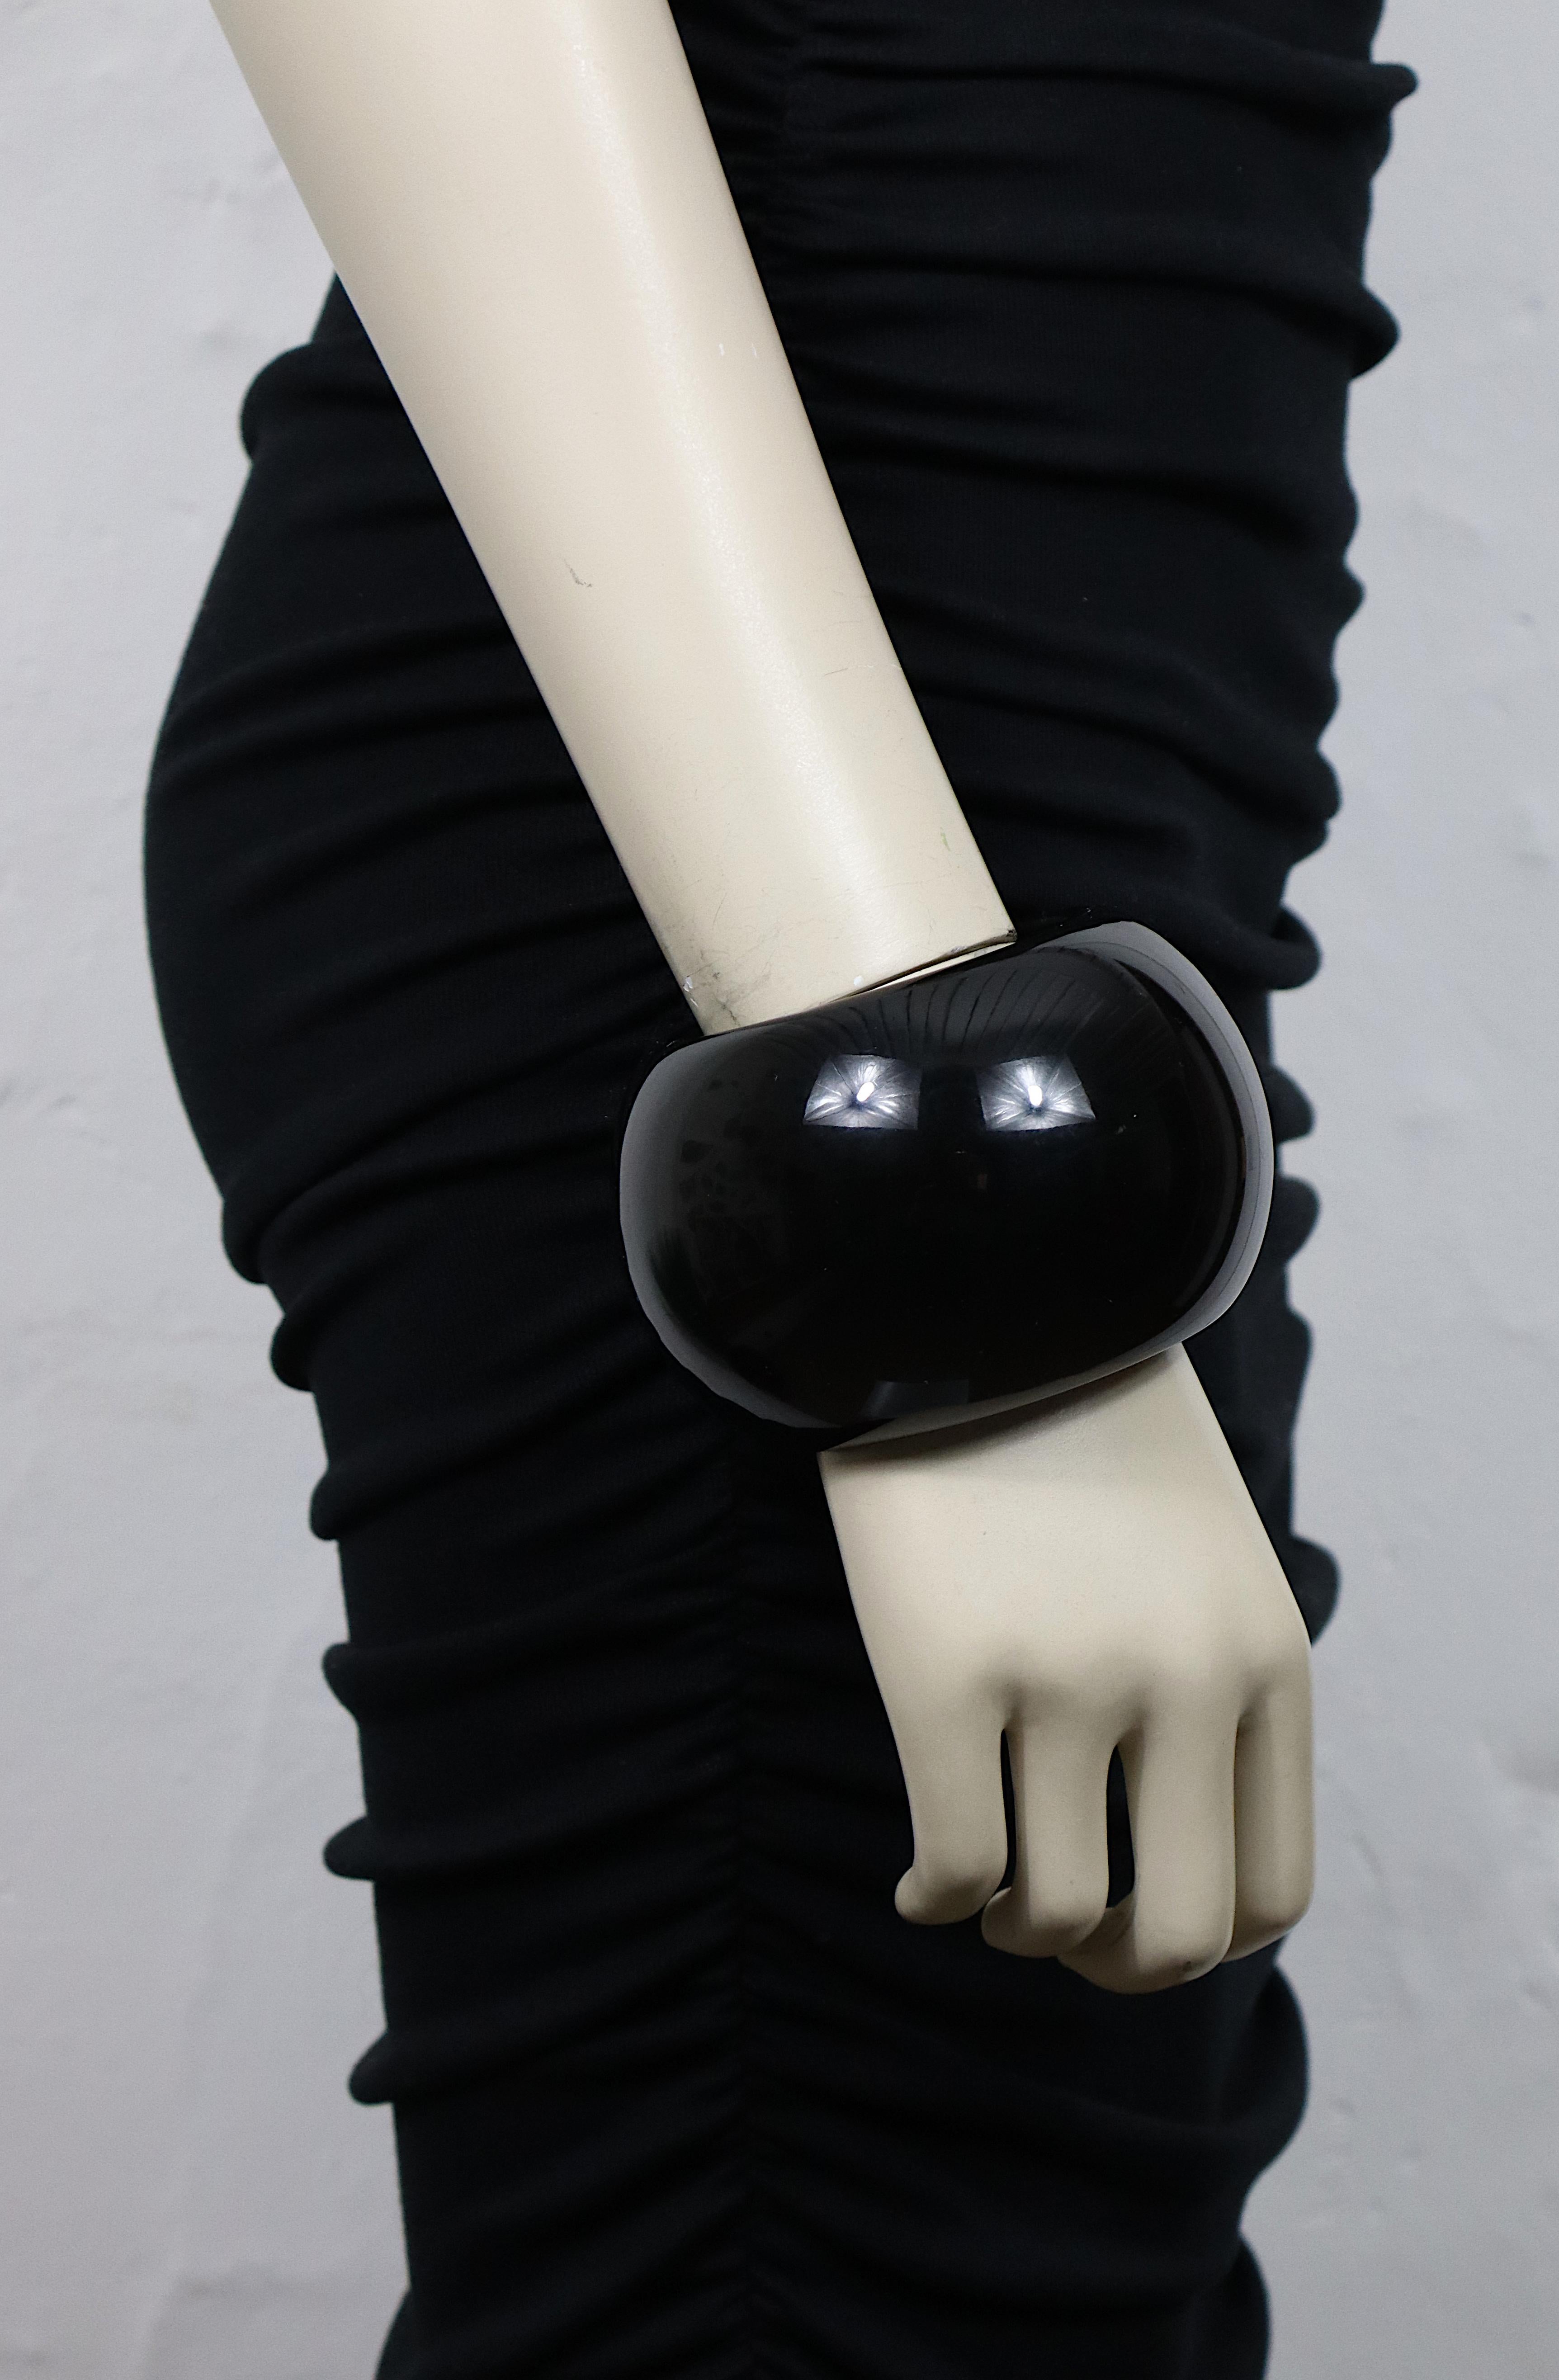 YVES SAINT LAURENT oversized black resin cuff bracelet.

Embossed YVES SAINT LAURENT.

Has weight on it.

Indicative measurements : inner circumference approx. 20.73 cm (8.16 inches) / width approx. 6.5 cm (2.56 inches).

Material : Resin.

NOTES
•